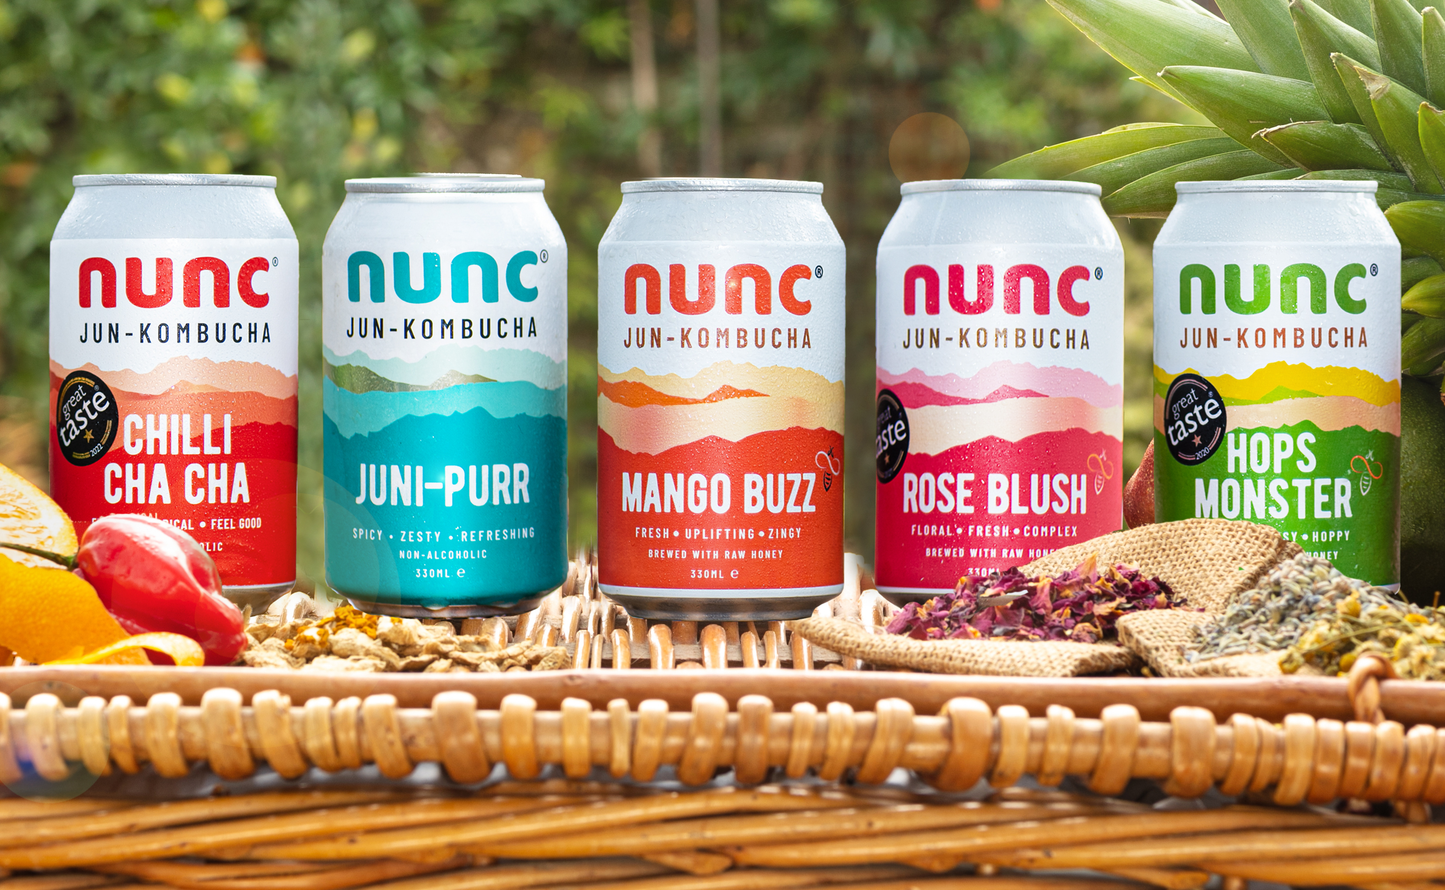 Nunc's full flavour range of all natural alcohol free kombucha drinks. Packed full of antioxidants, beneficial acids, and other goodness for your gut health.